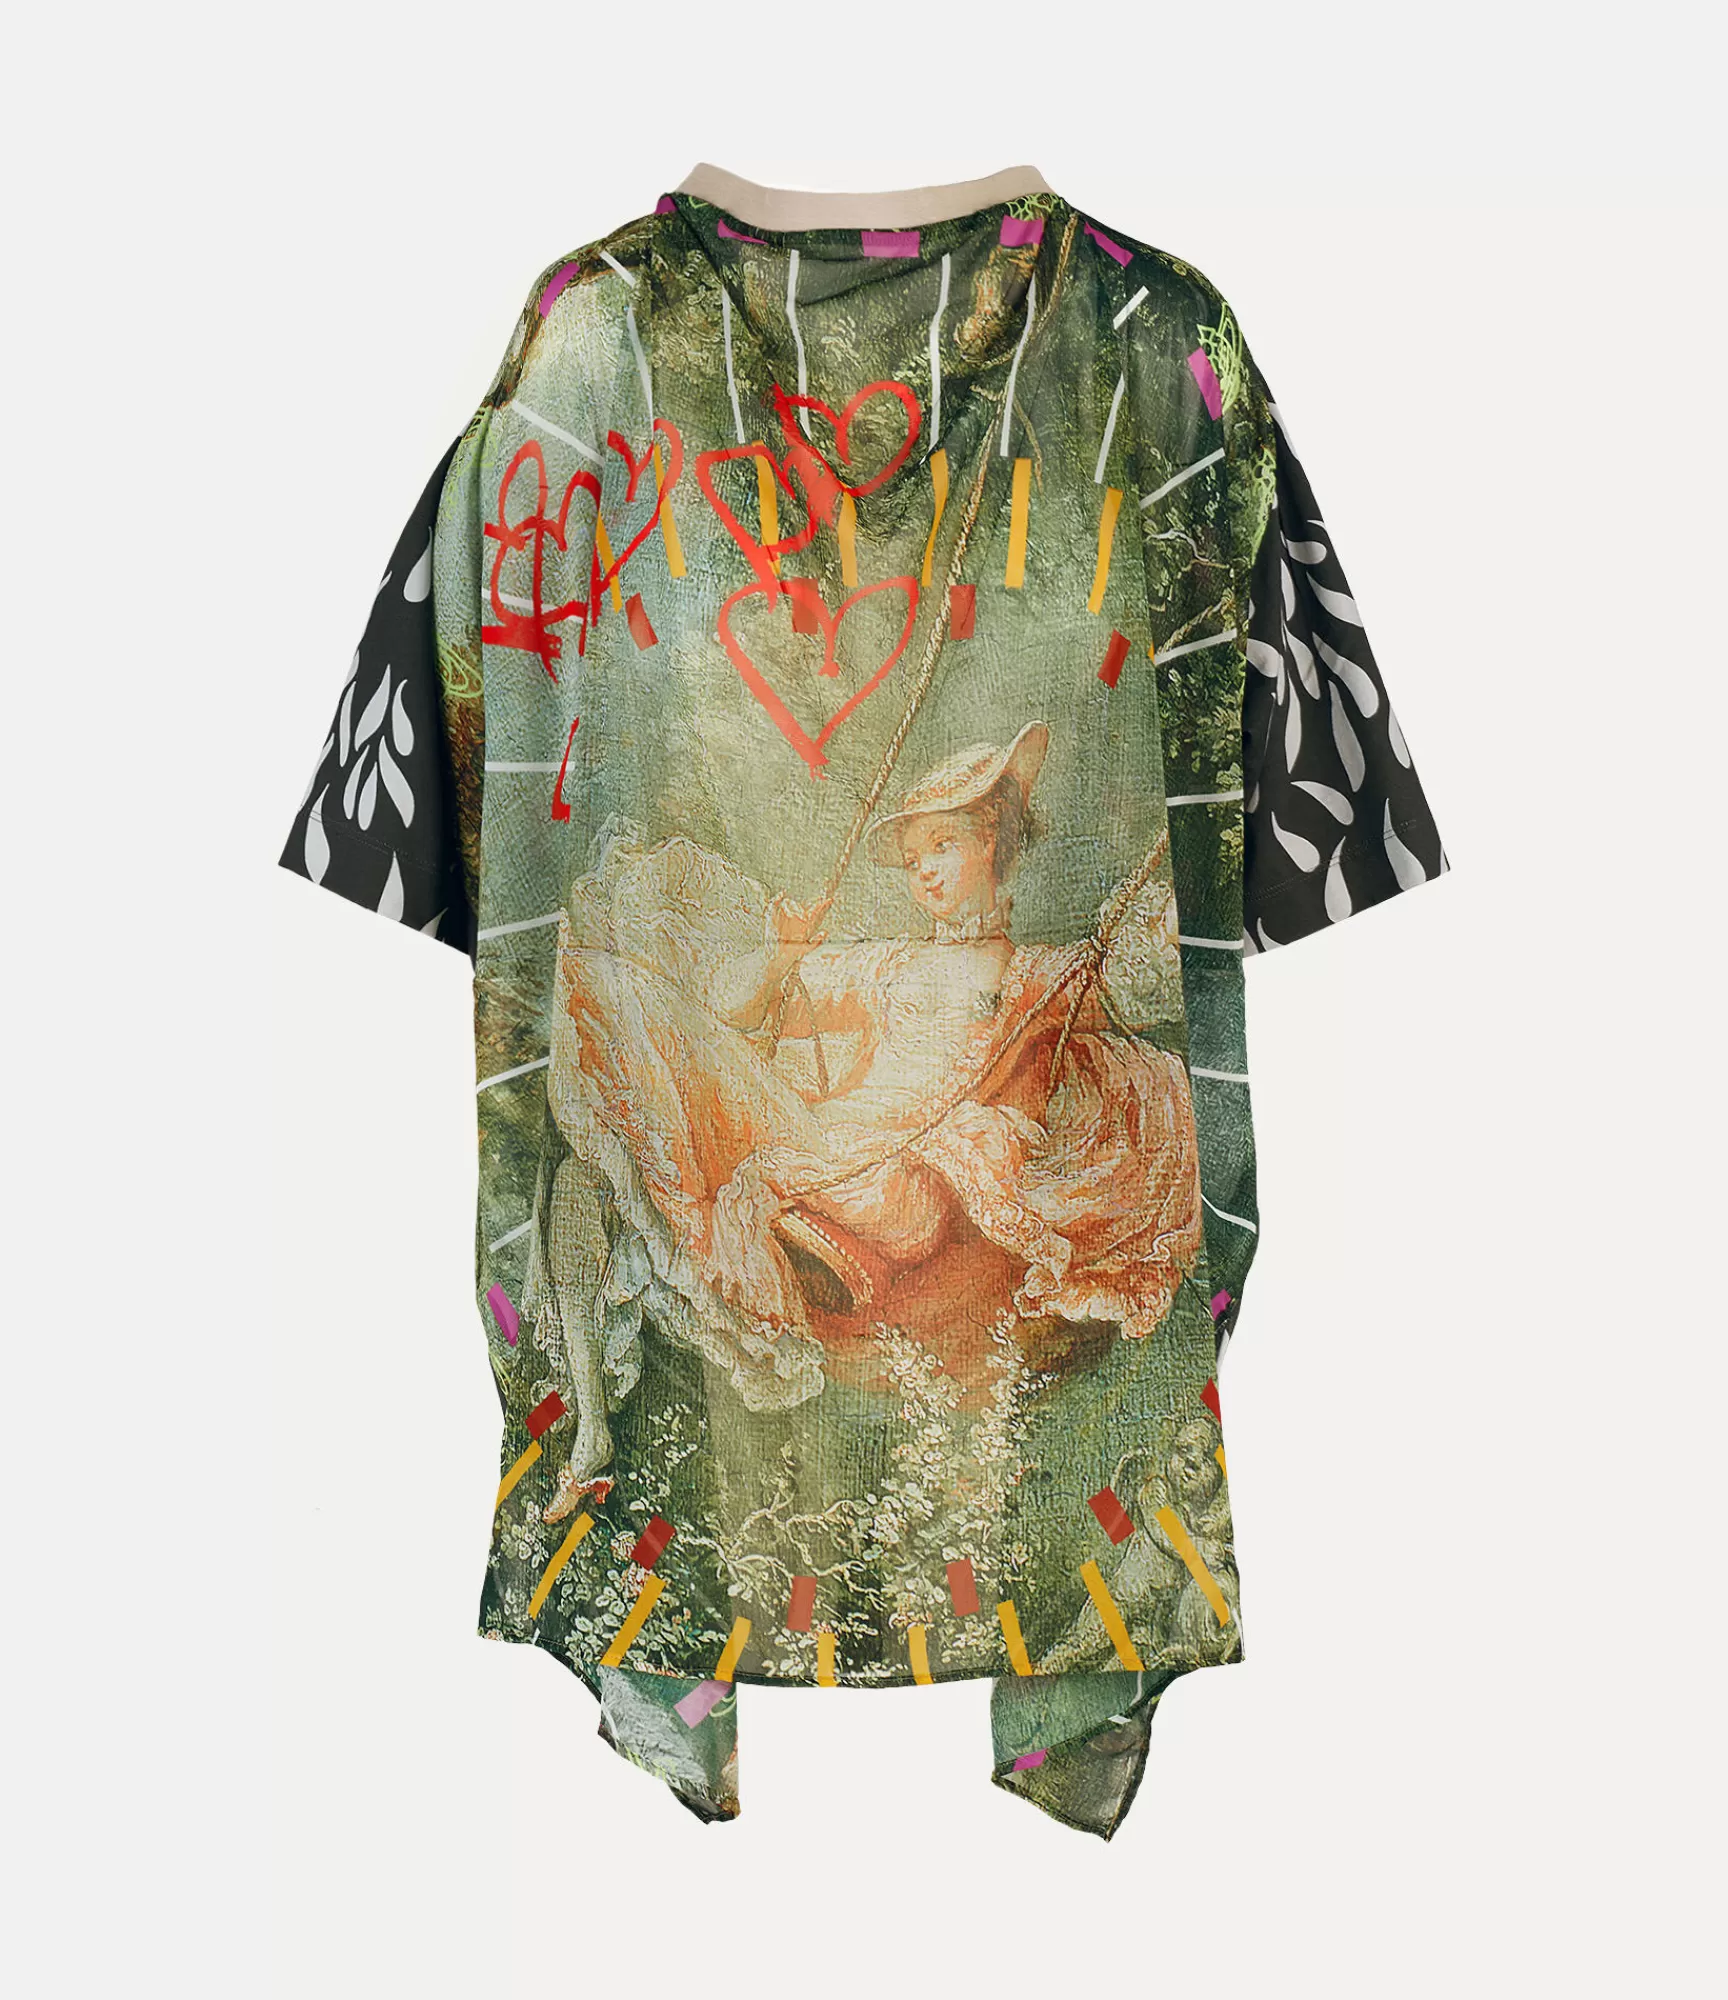 Vivienne Westwood Sweatshirts and T-Shirts | Tops and Shirts*Swing top Multi